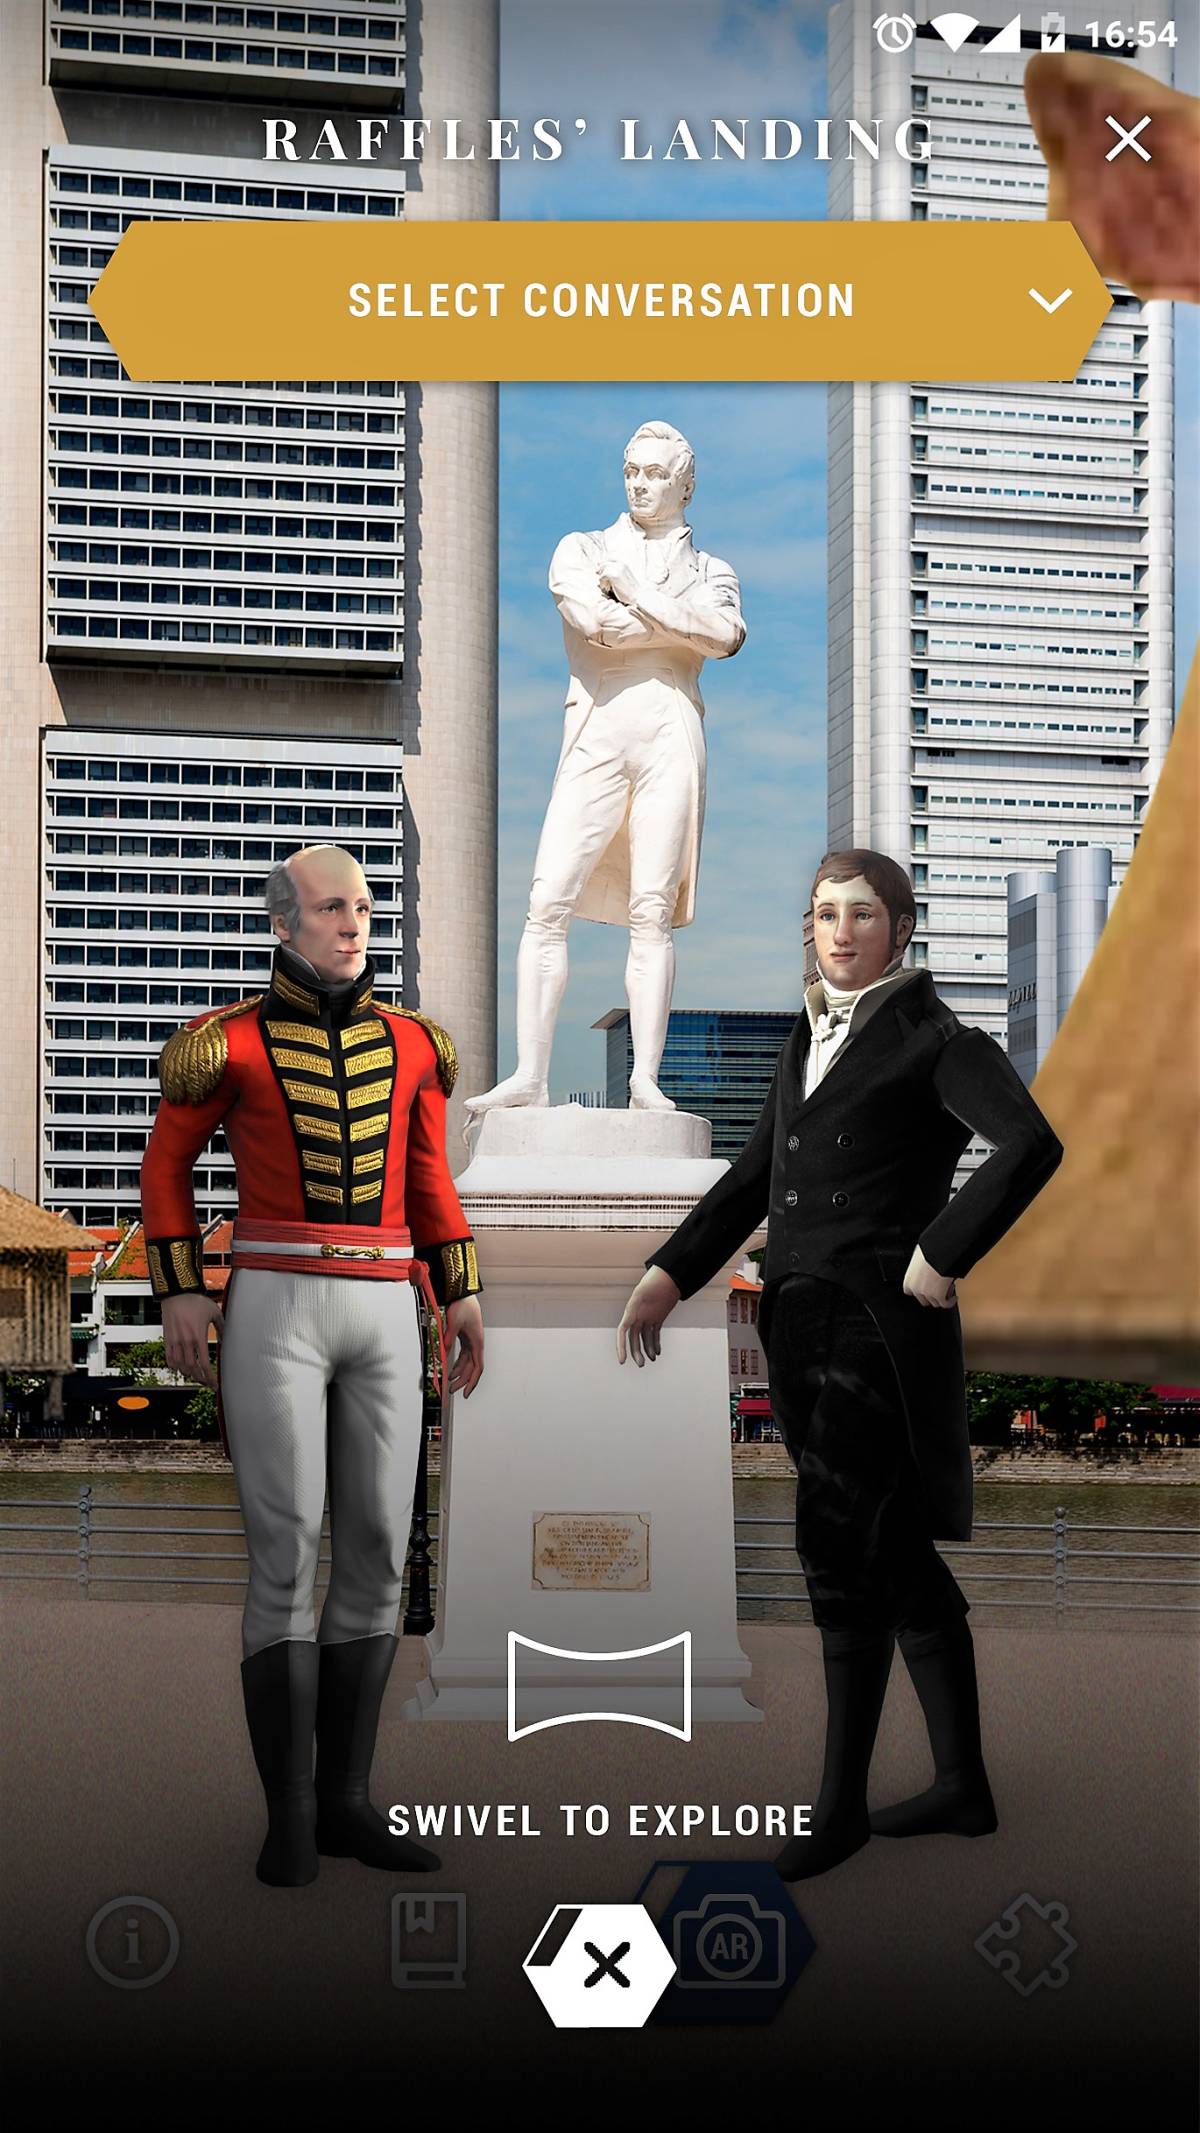 NEW AUGMENTED REALITY TRAIL “BALIKSG” BRINGS SINGAPORE'S HISTORY TO LIFE